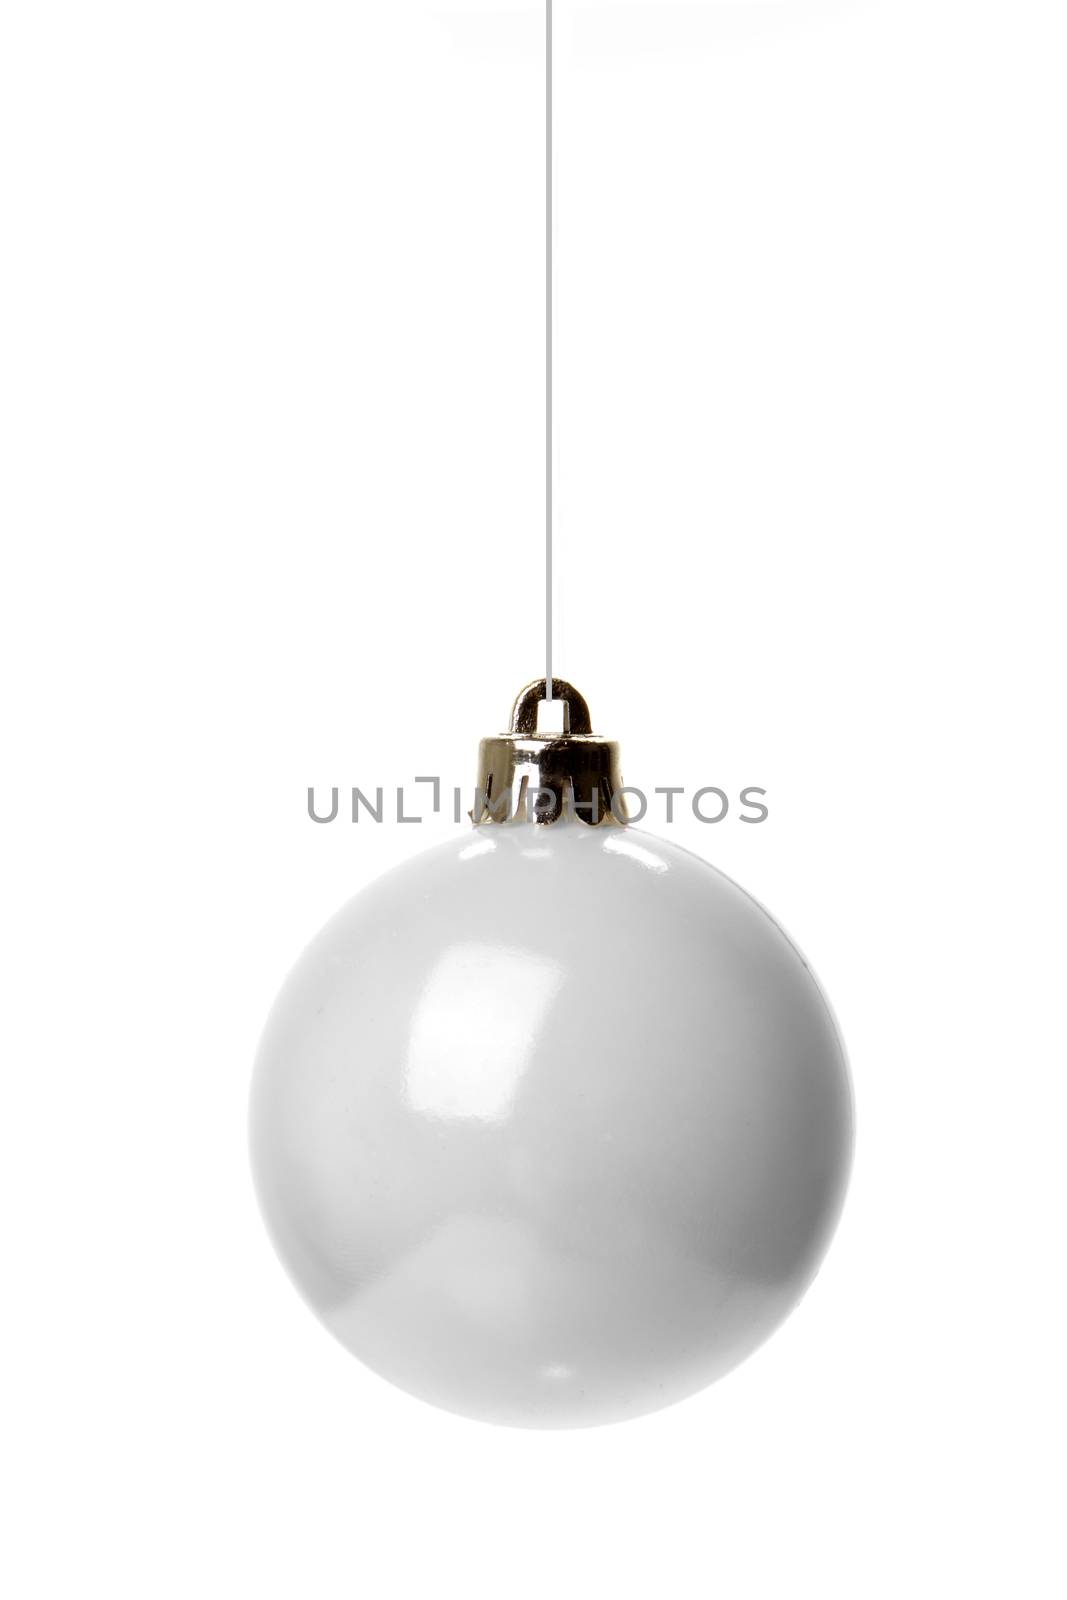 christmas ornament white by Tomjac1980